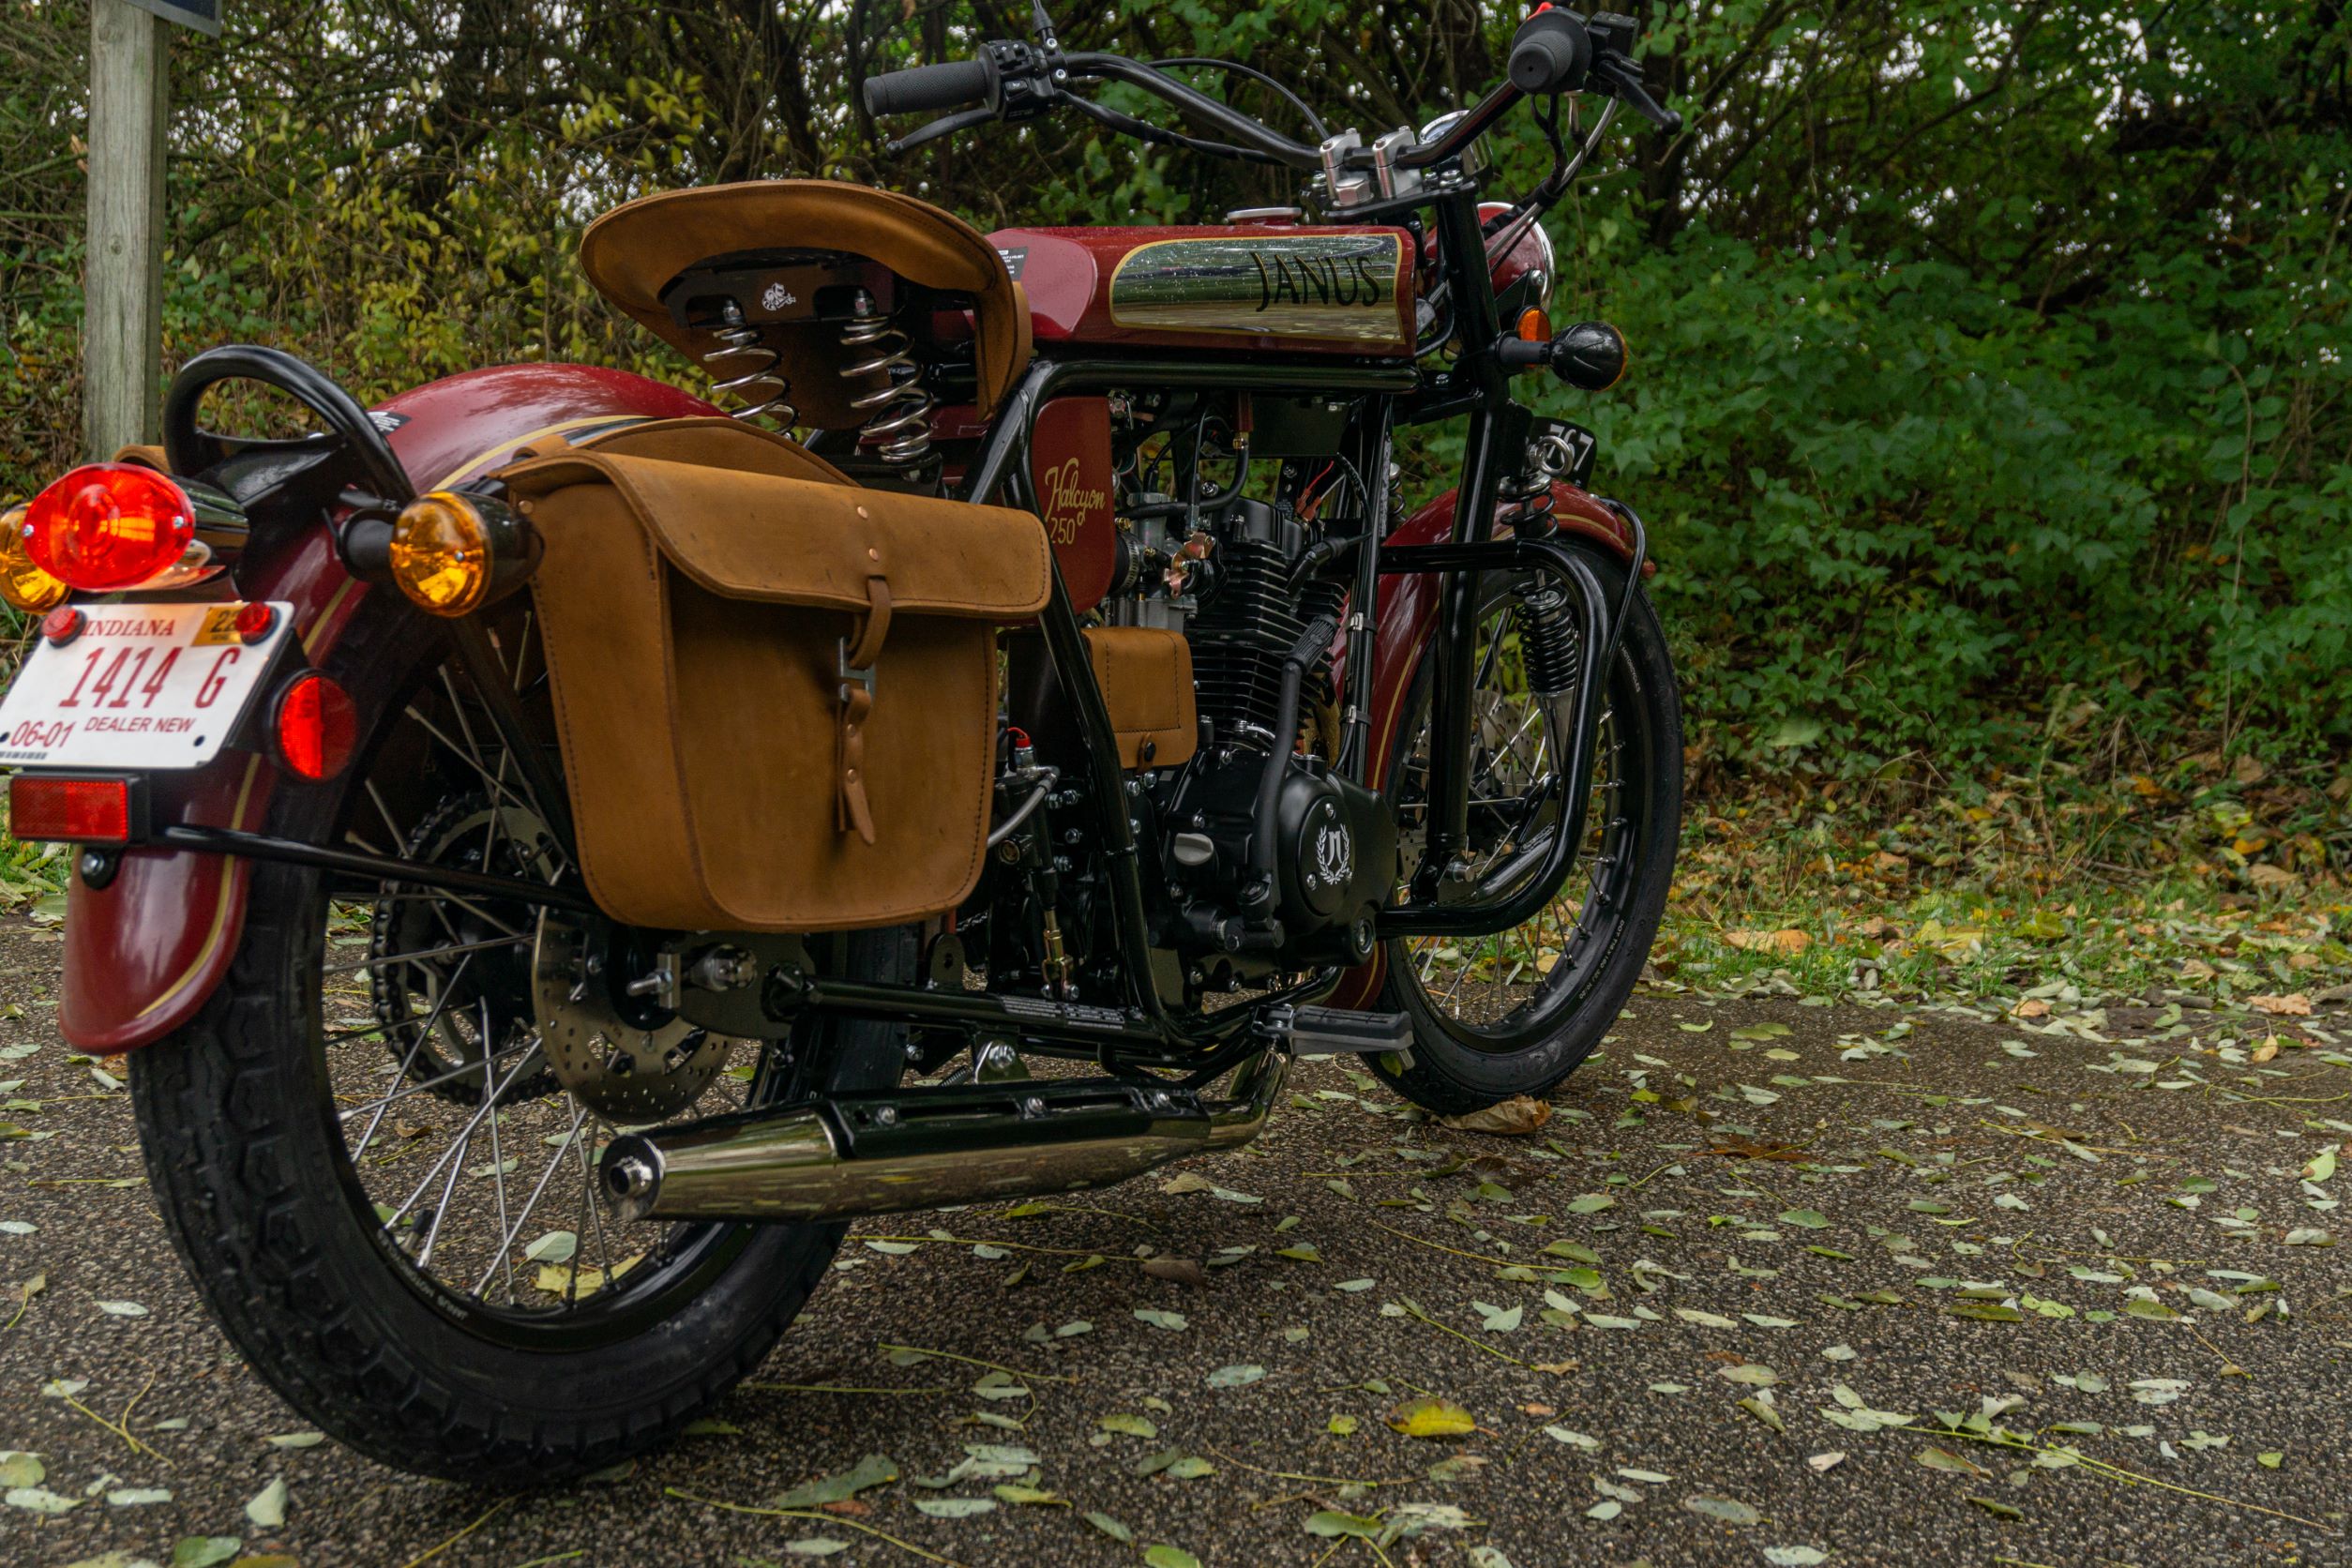 Janus Halcyon 250: Modern Classic Motorcycling in All the Right Ways